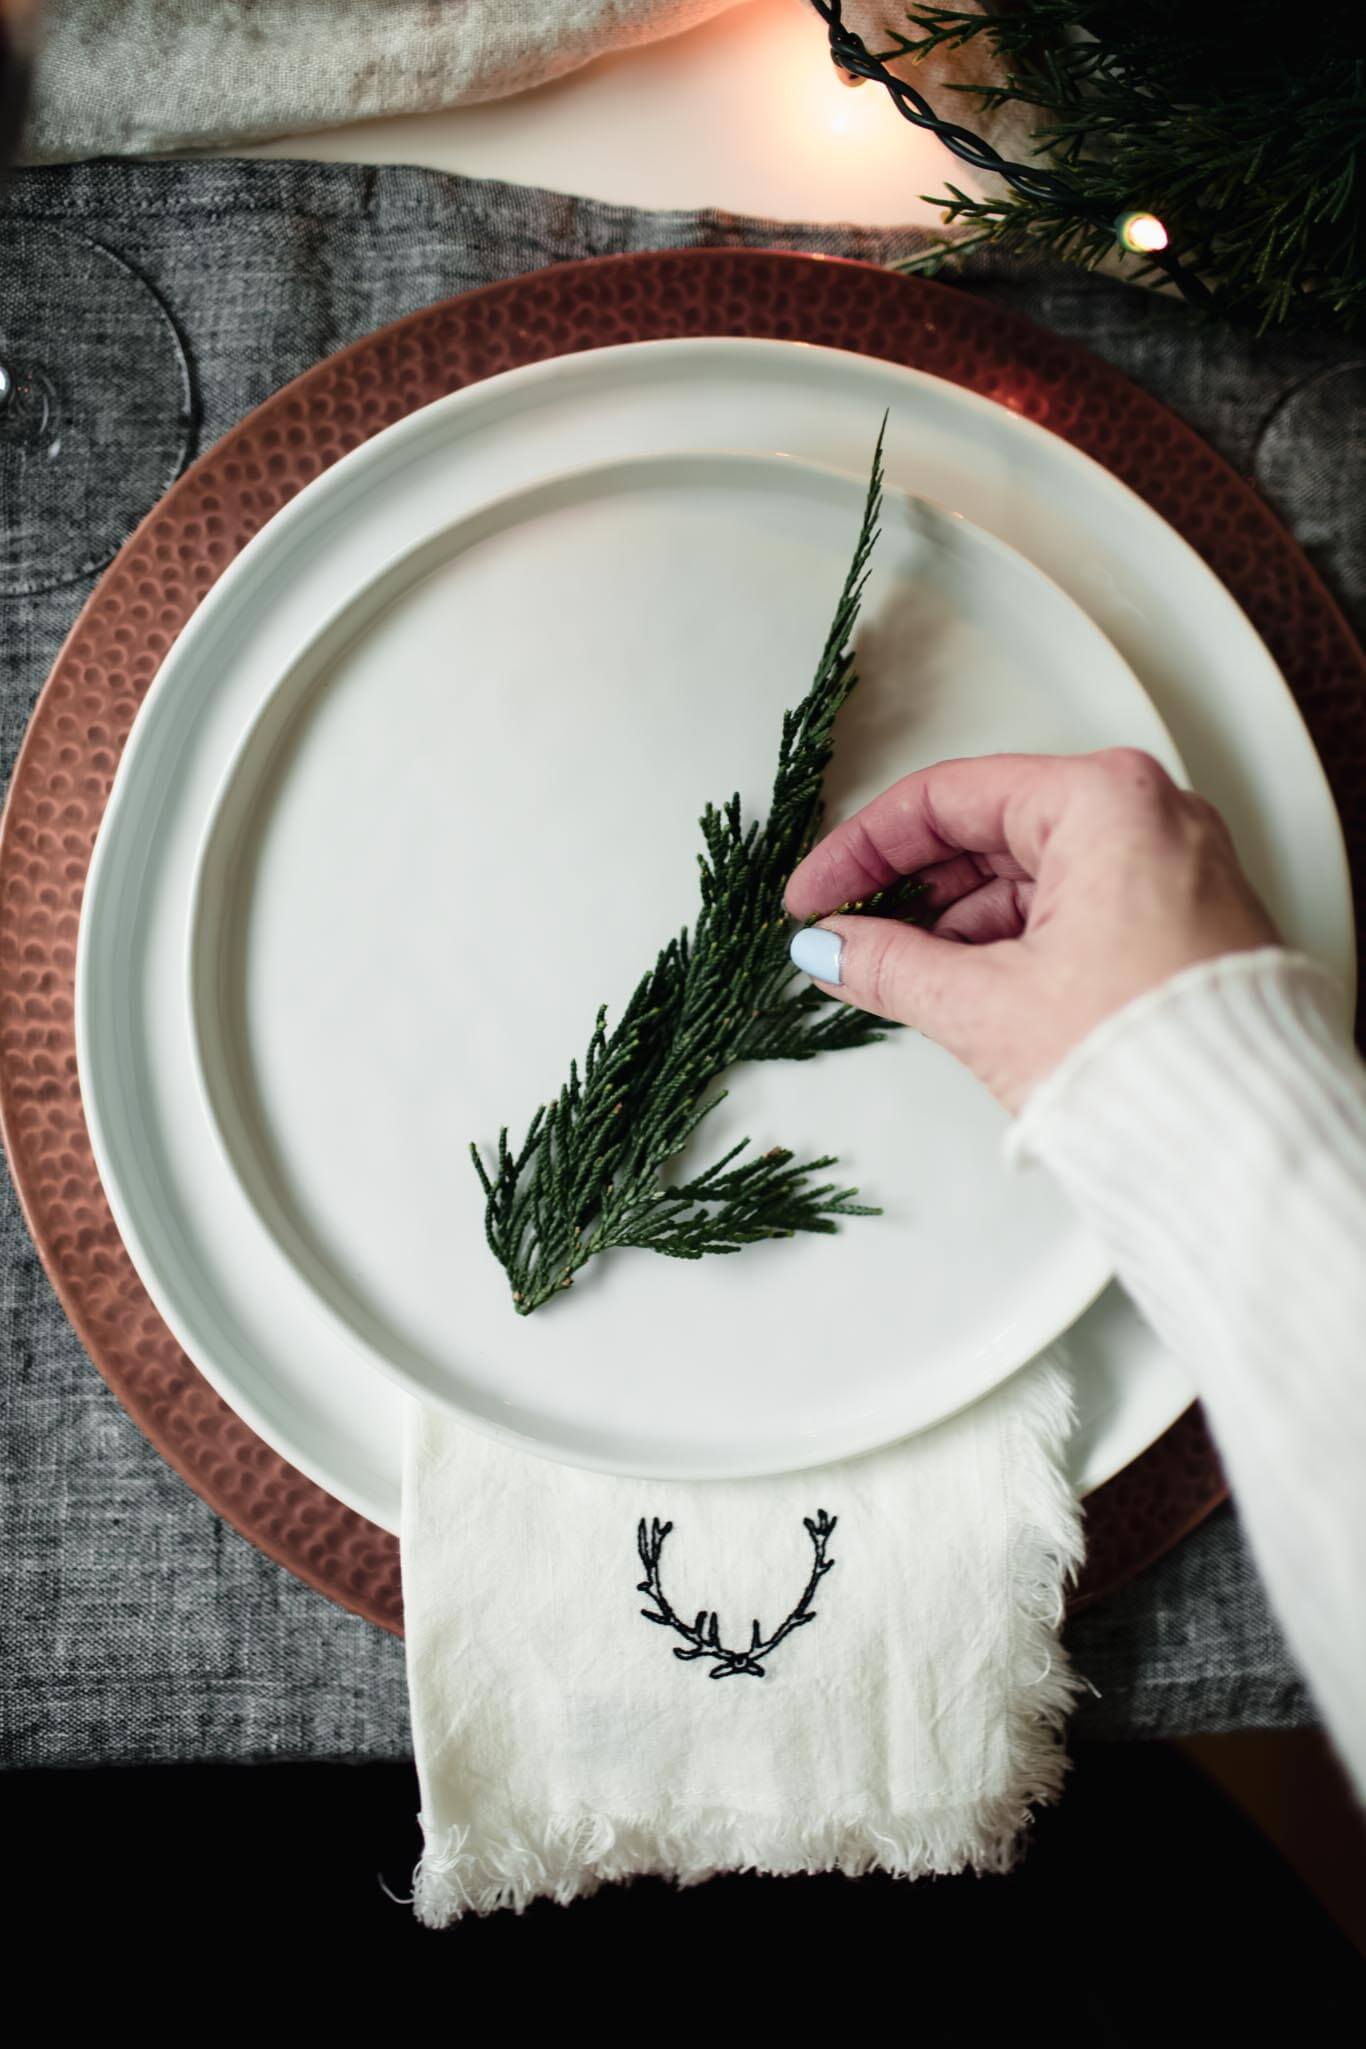 Table setting with white plates and pine sprig as decoration for the holidays.